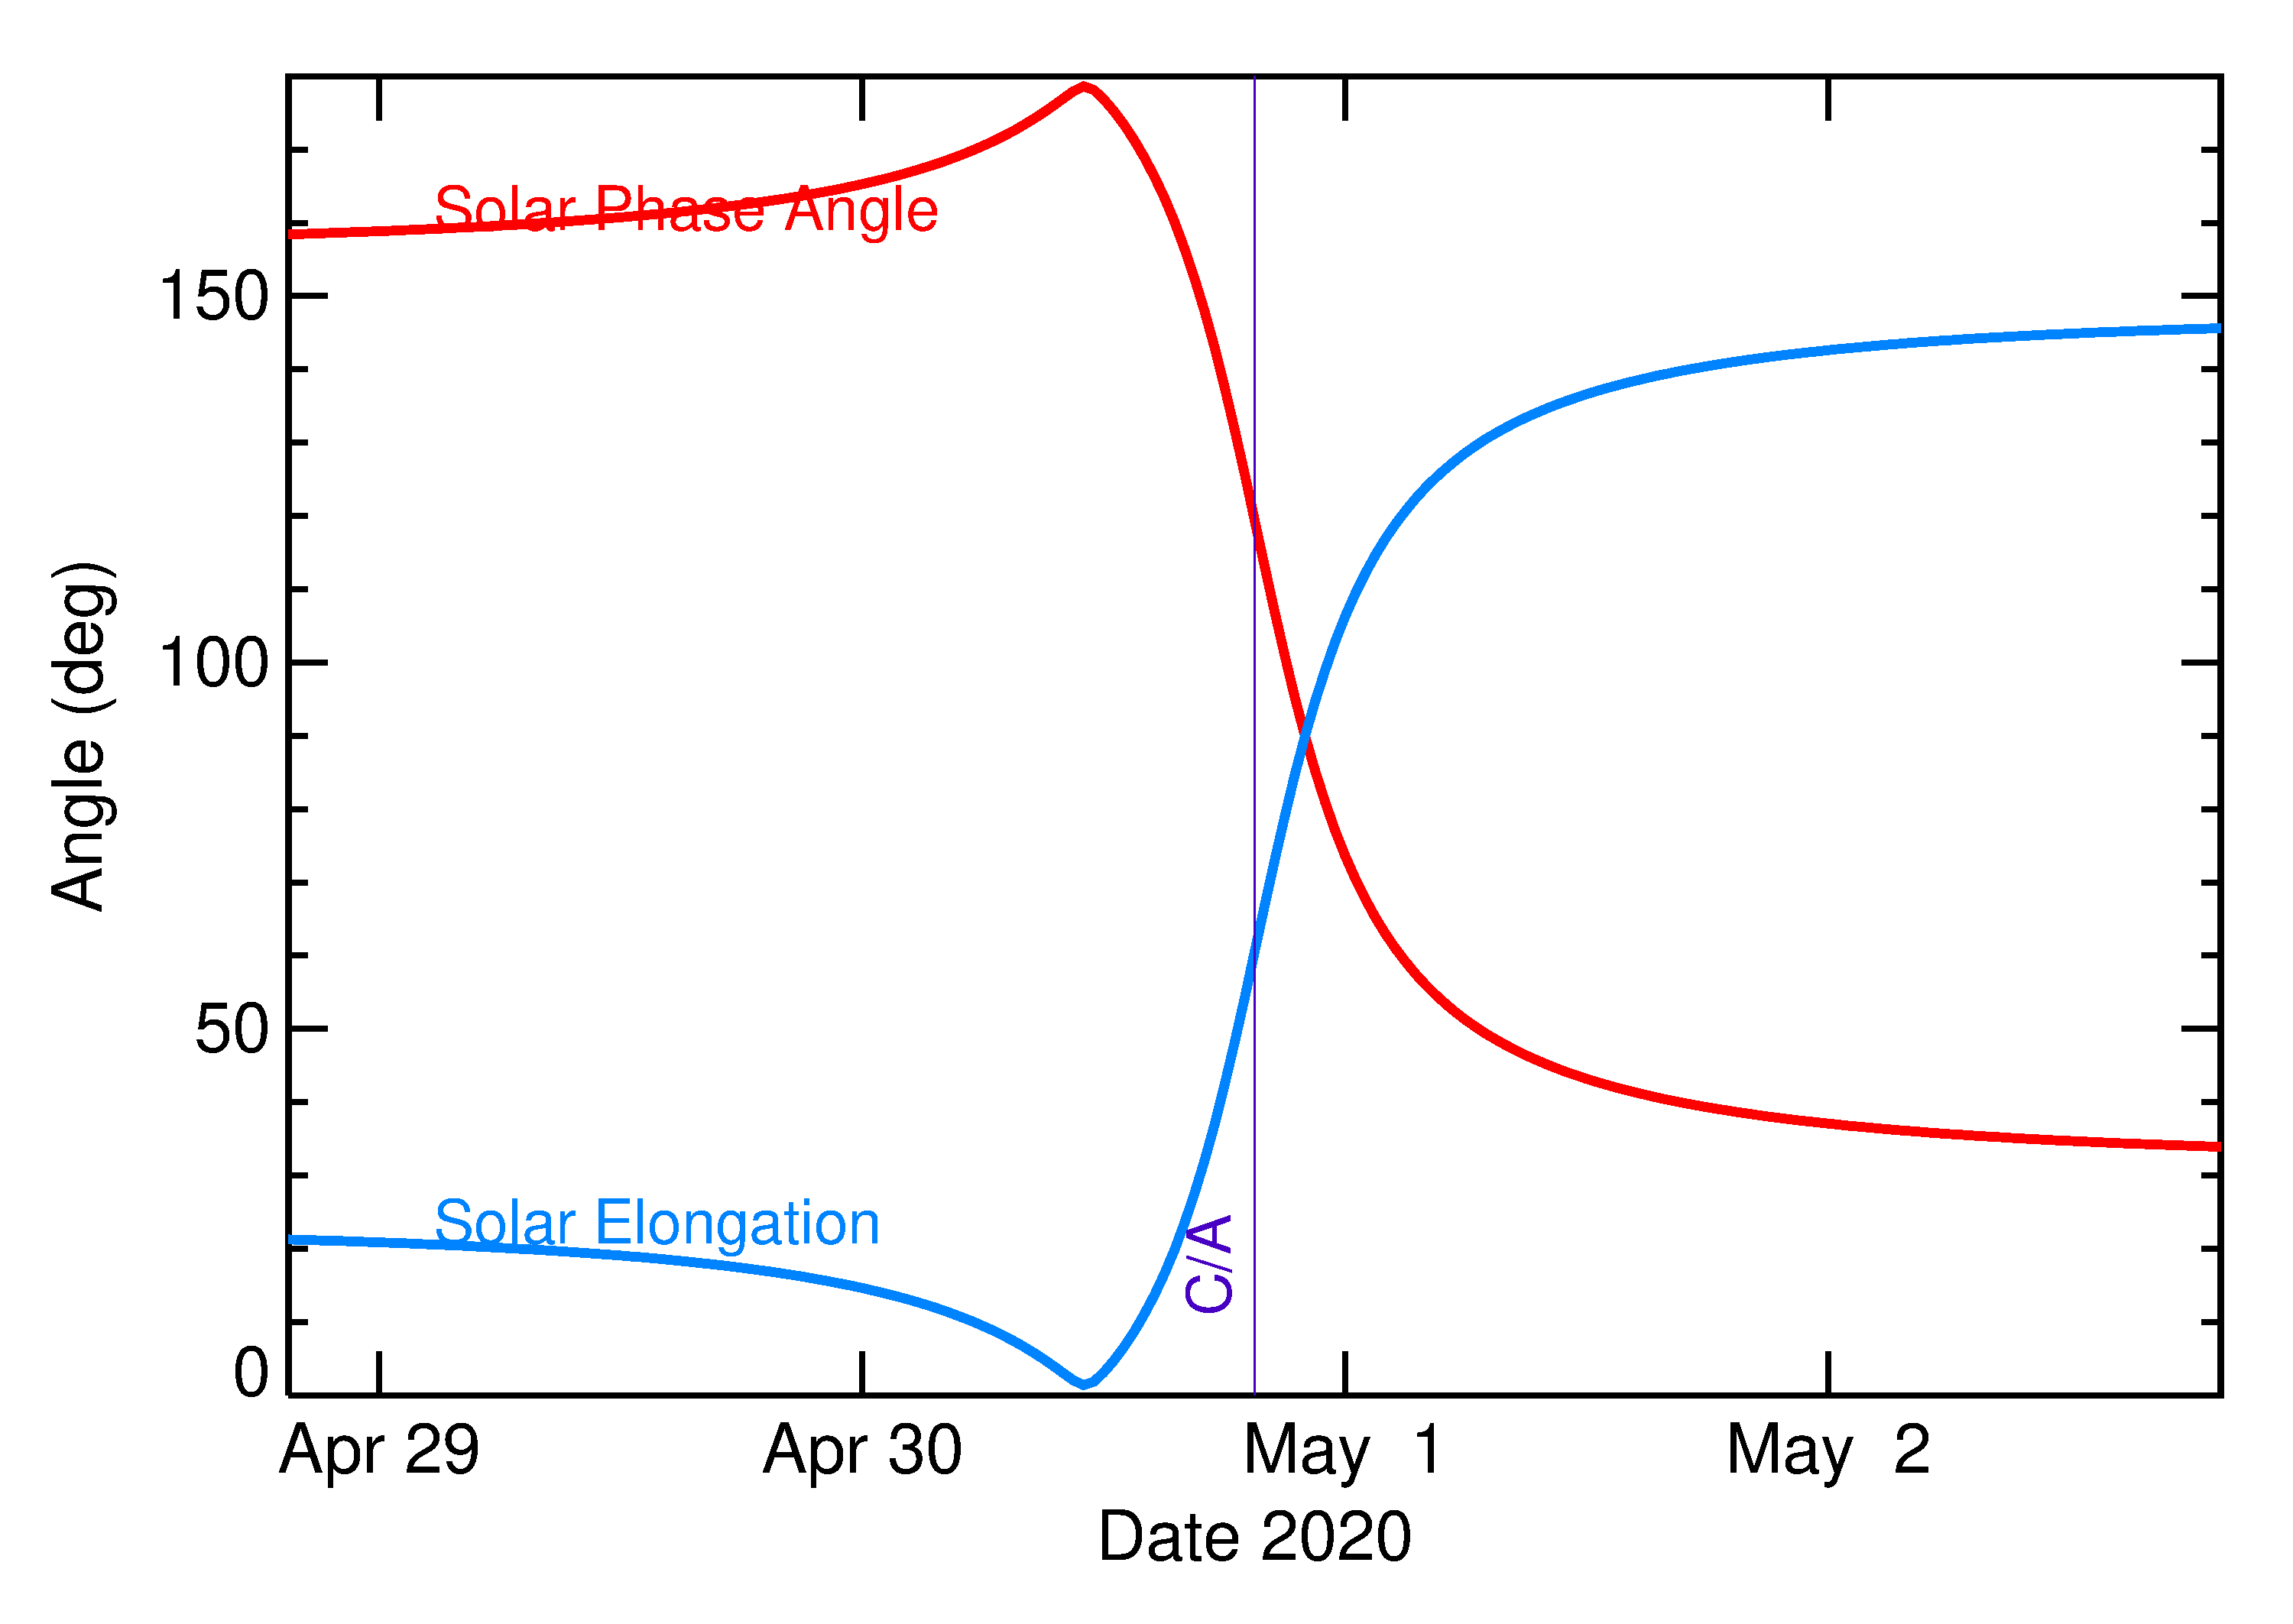 Solar Elongation and Solar Phase Angle of 2020 JG in the days around closest approach